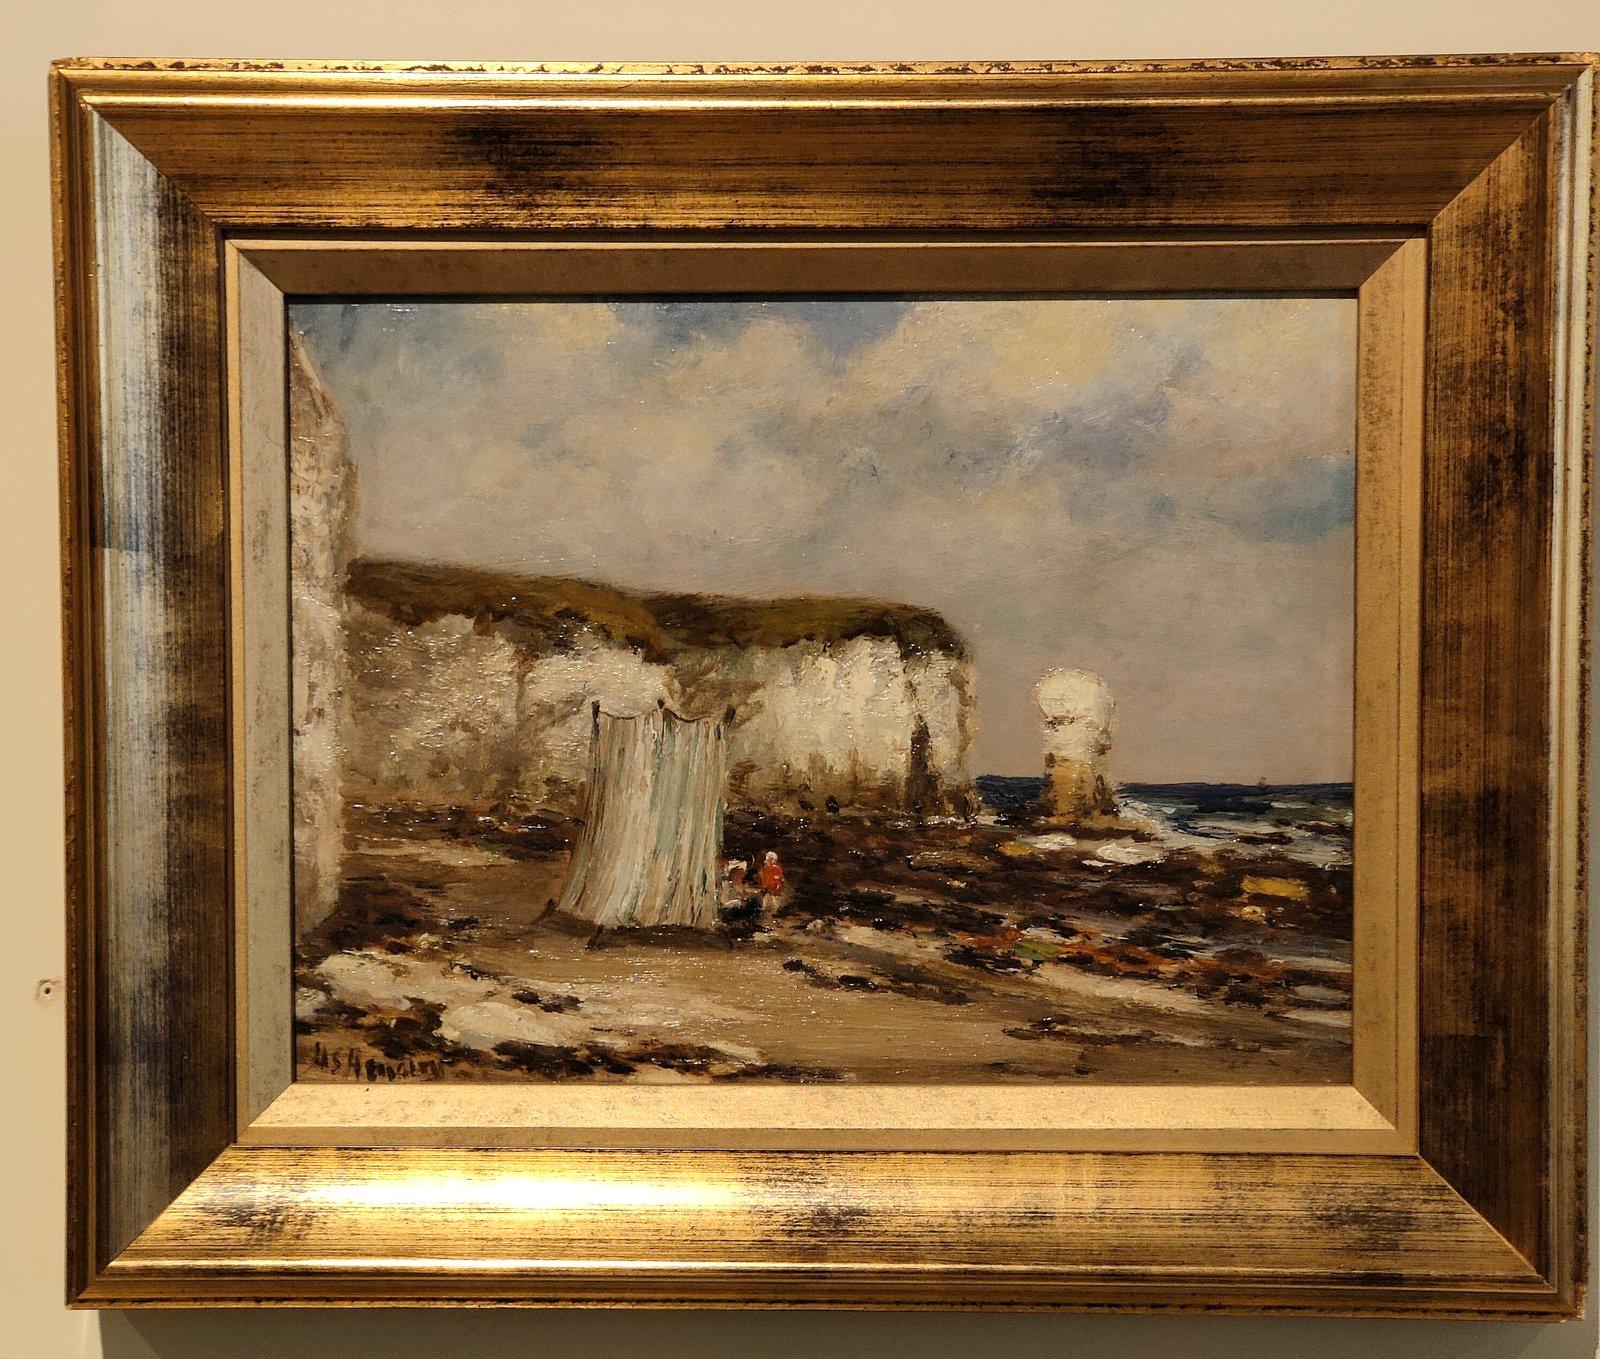 Oil Painting by Hugh Shearwin Hemsley "Favourite Bathing Spot" 1852 -1925 Born in Tadcaster Yorkshire he had a studio in Leeds from where he exhibited at the Yorkshire union of artists and the Royal Academy. Oil on board. Signed

Dimensions